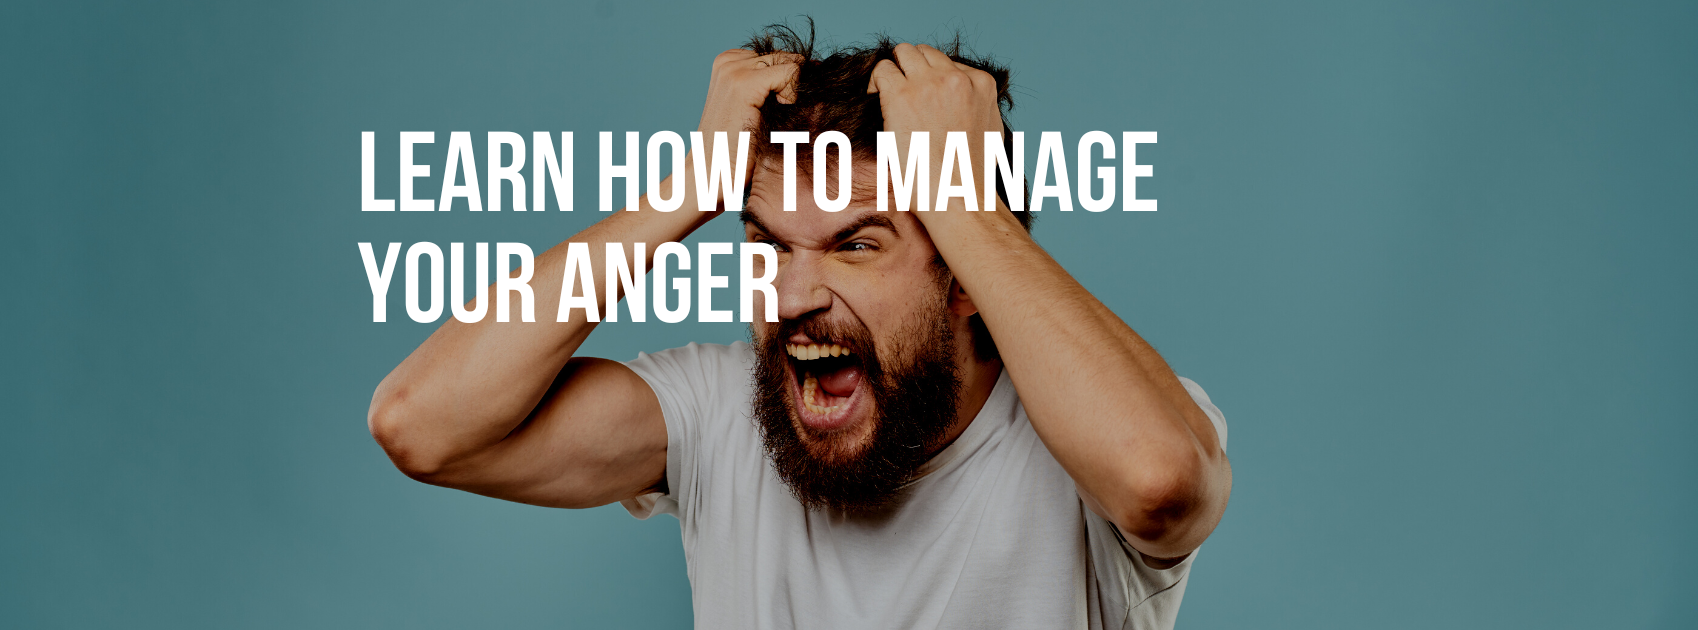 Learn How to Manage Your Anger